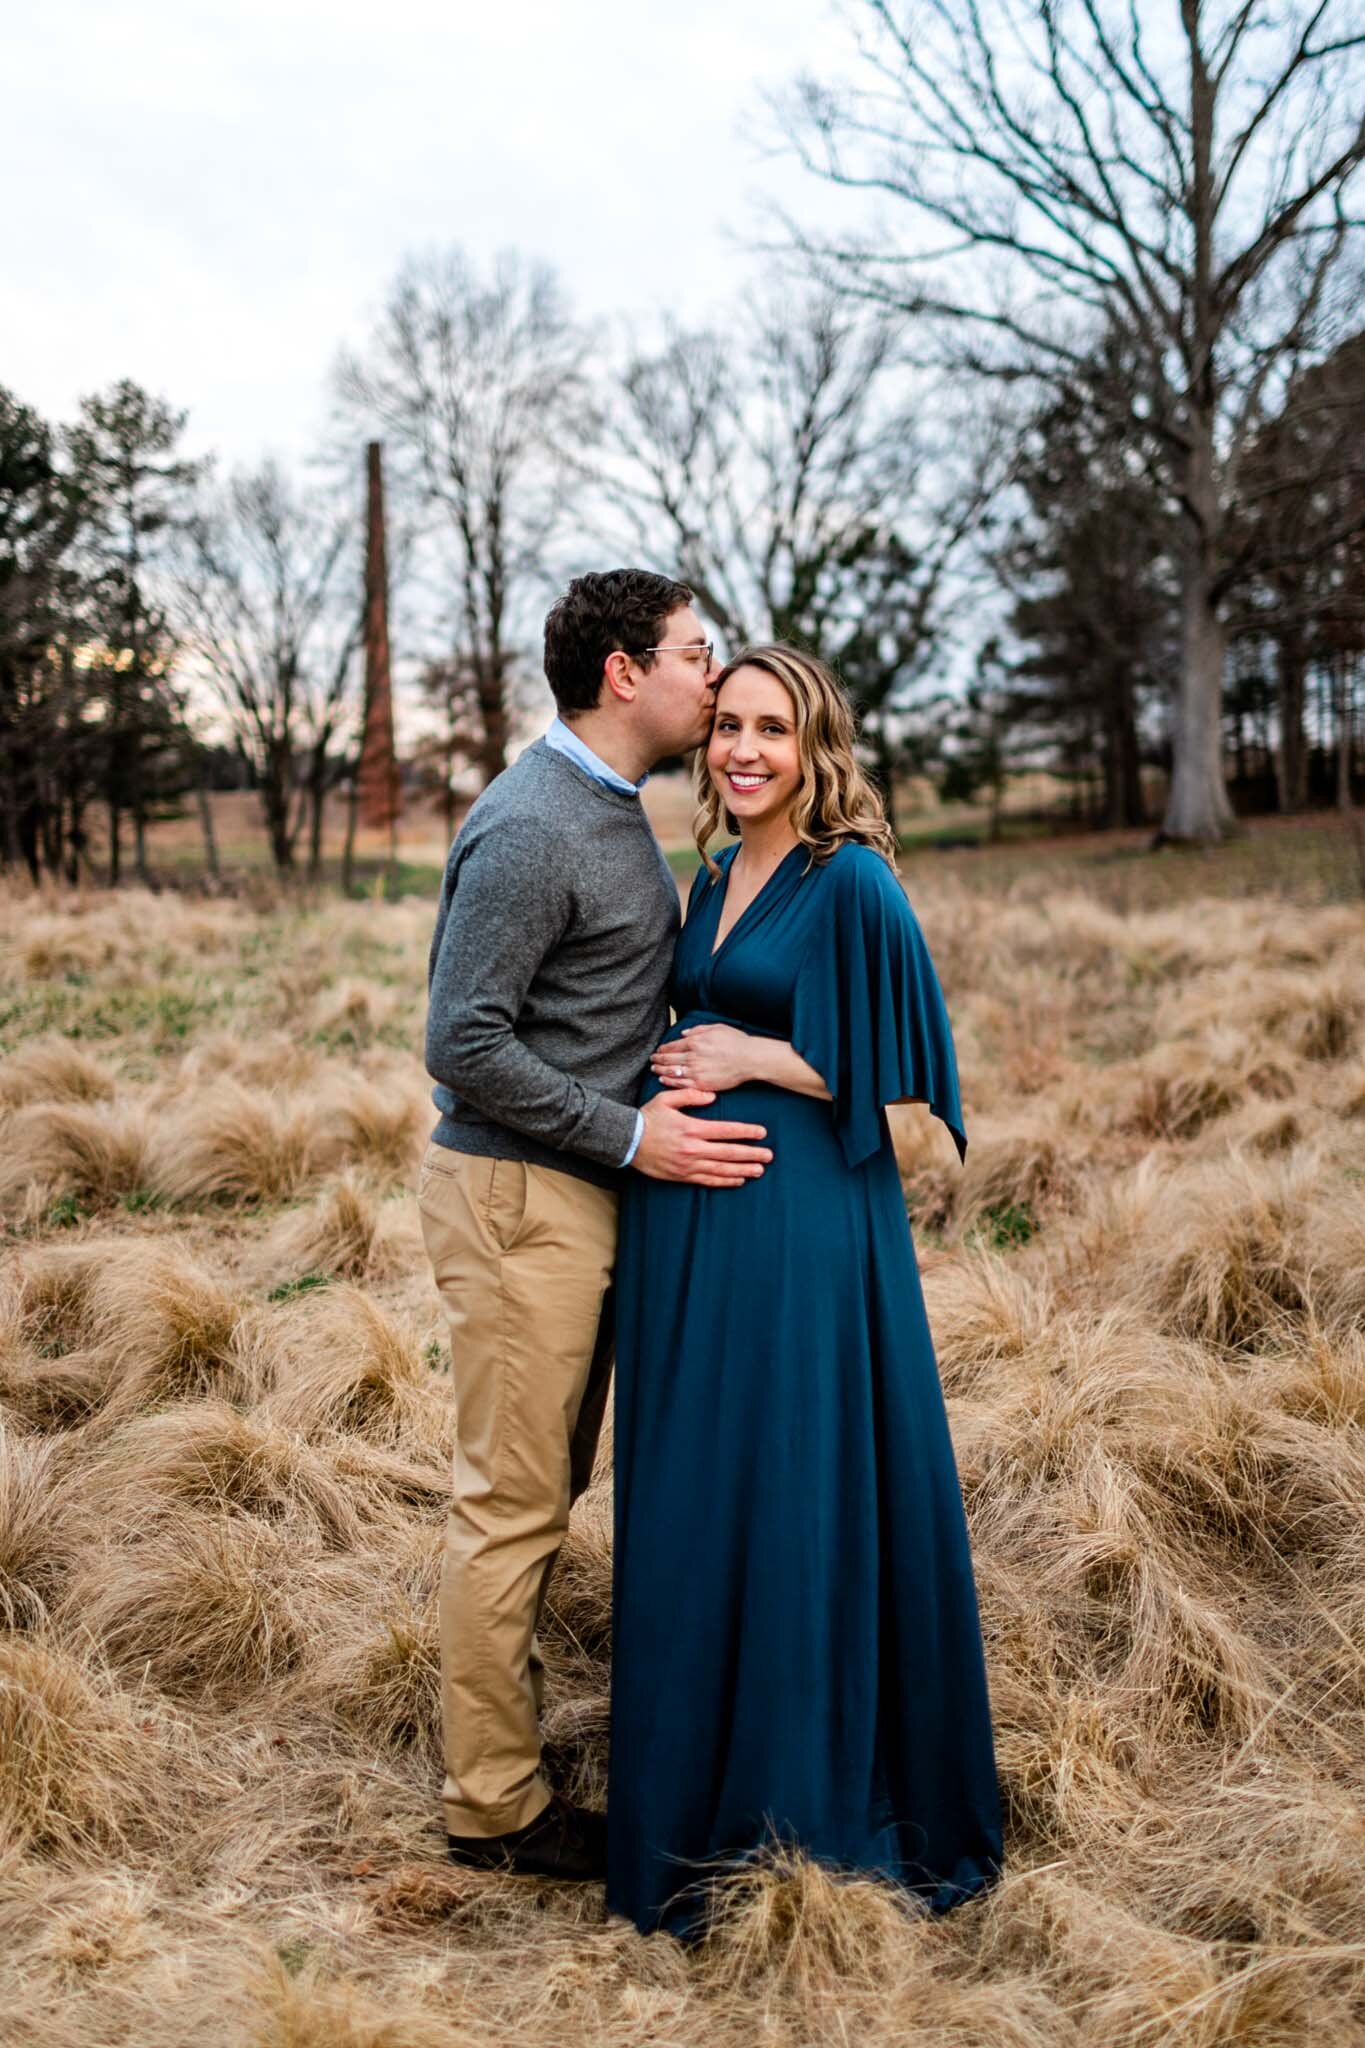 Raleigh Newborn Photographer | By G. Lin Photography | Man kissing woman on cheek and standing in open field at NCMA